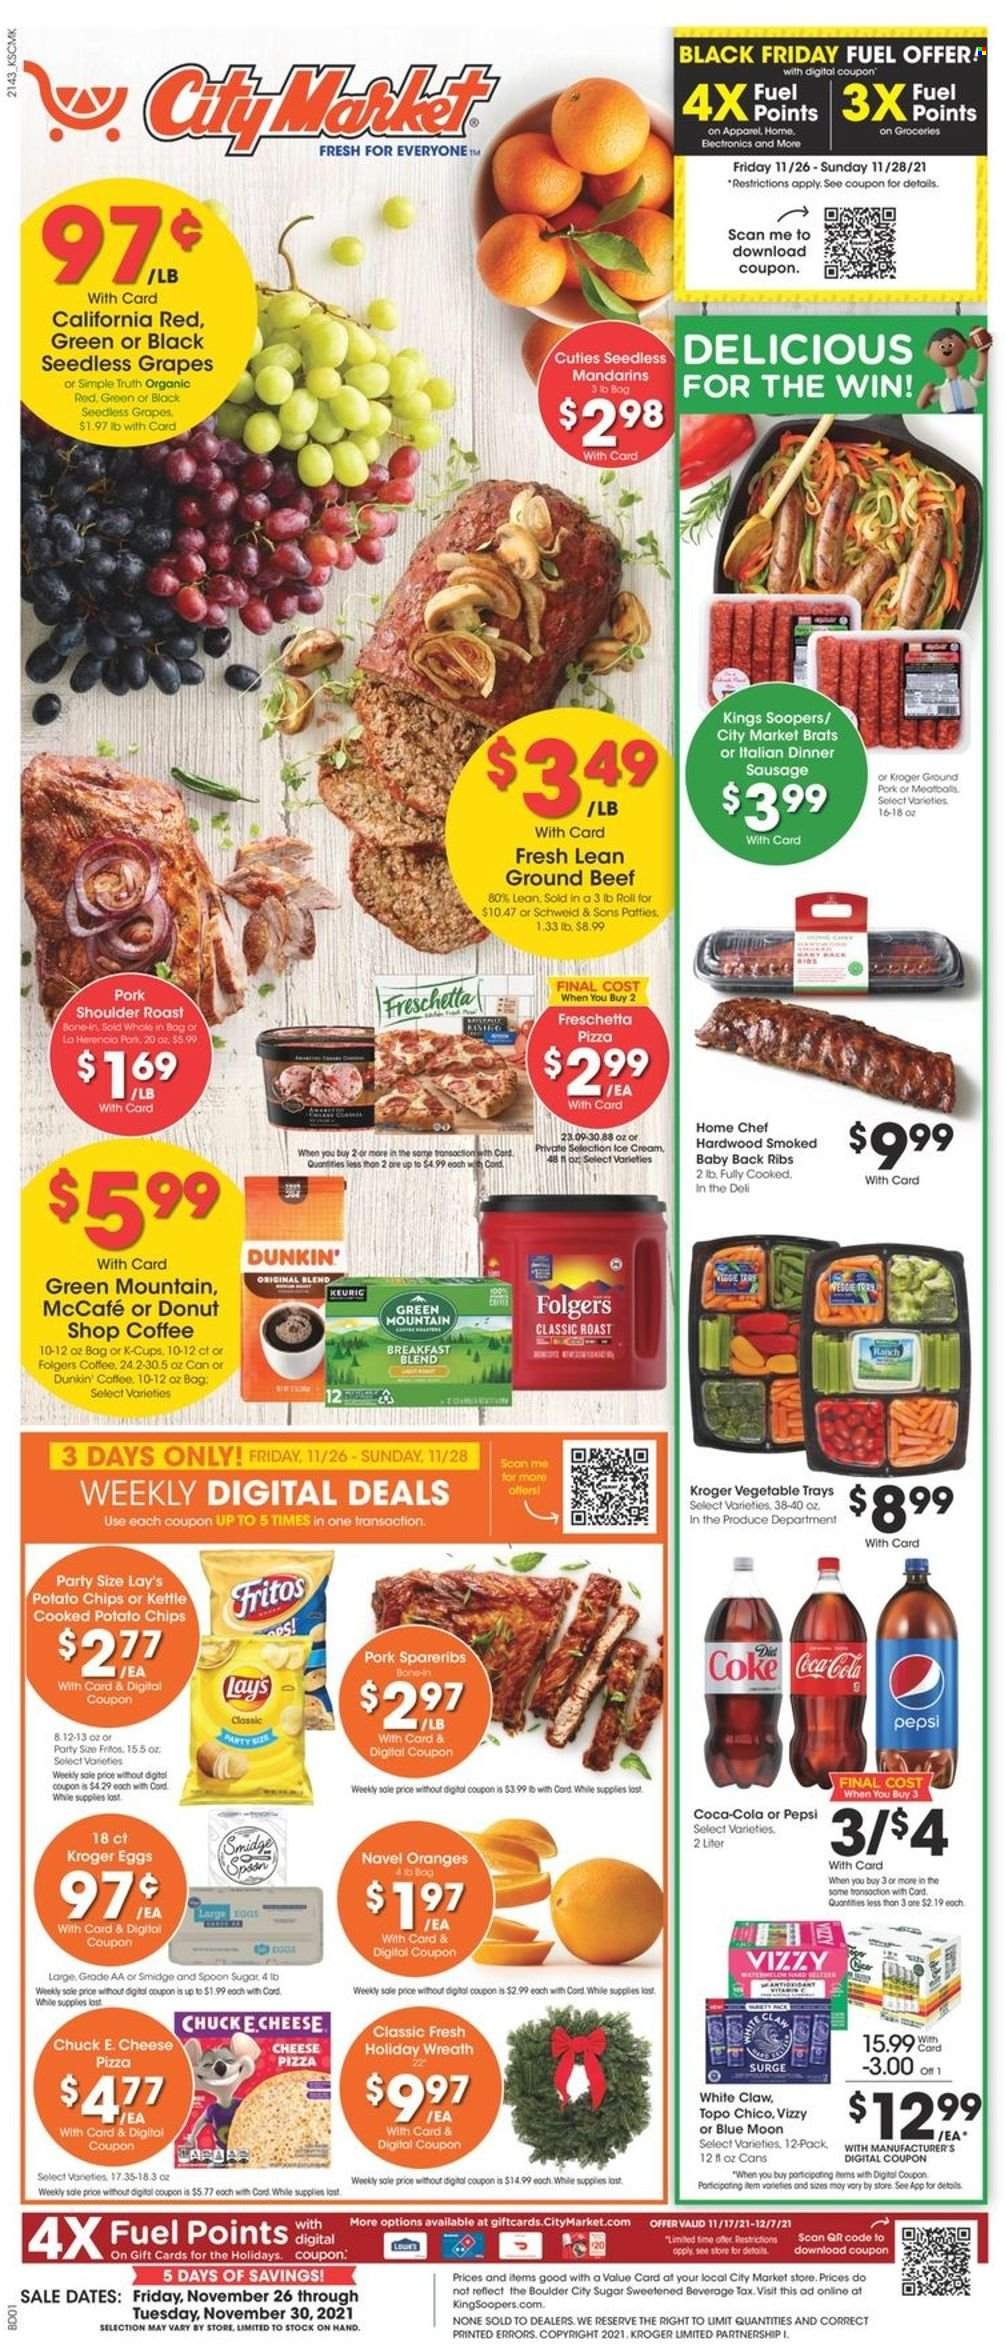 City Market Flyer - 11/26/2021 - 11/30/2021 - Sales products - seedless grapes, grapes, mandarines, orange, pizza, sausage, eggs, ice cream, Fritos, potato chips, chips, Lay's, sugar, Coca-Cola, Pepsi, coffee, Folgers, coffee capsules, McCafe, K-Cups, breakfast blend, Green Mountain, White Claw, beer, beef meat, ground beef, pork meat, pork ribs, pork roast, pork shoulder, pork spare ribs, pork back ribs, spoon, Blue Moon, navel oranges. Page 1.